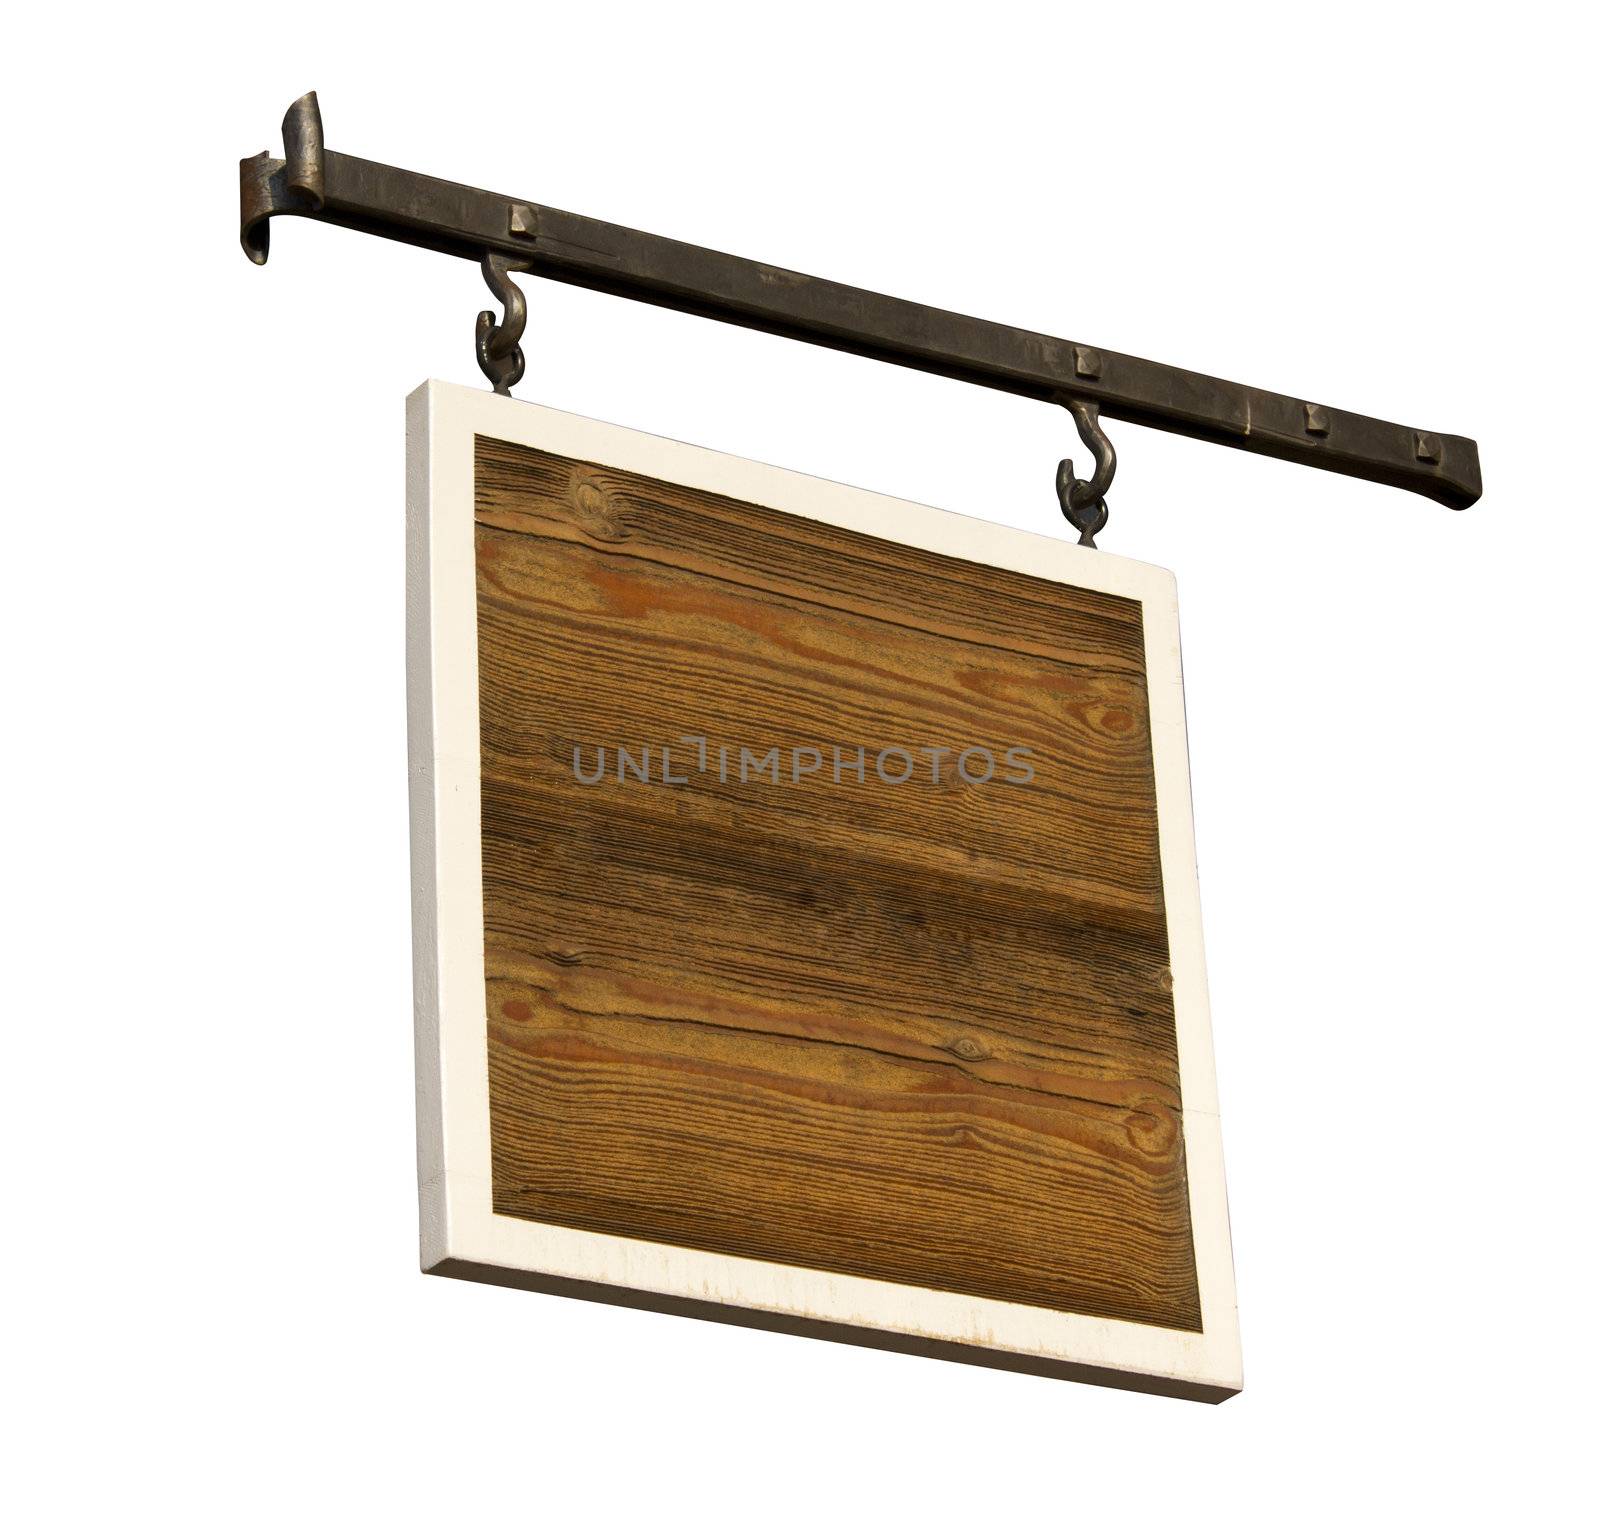 A wood board with a white frame hanging on rod iron